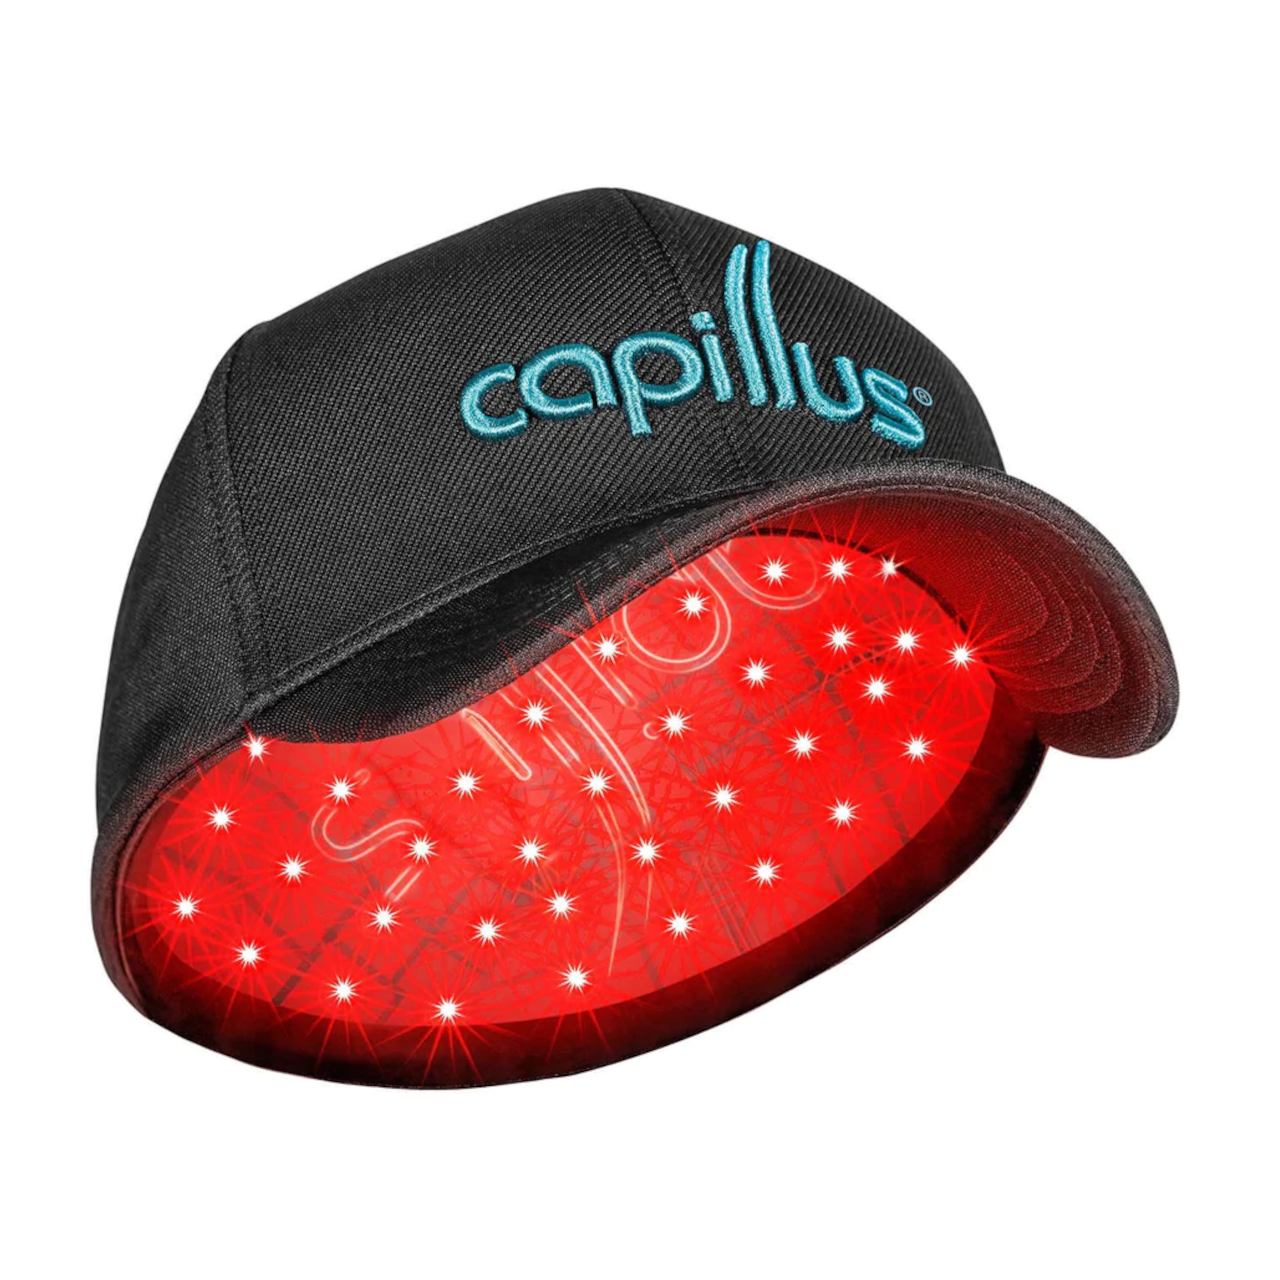 CapillusUltra Laser Cap Questions & Answers